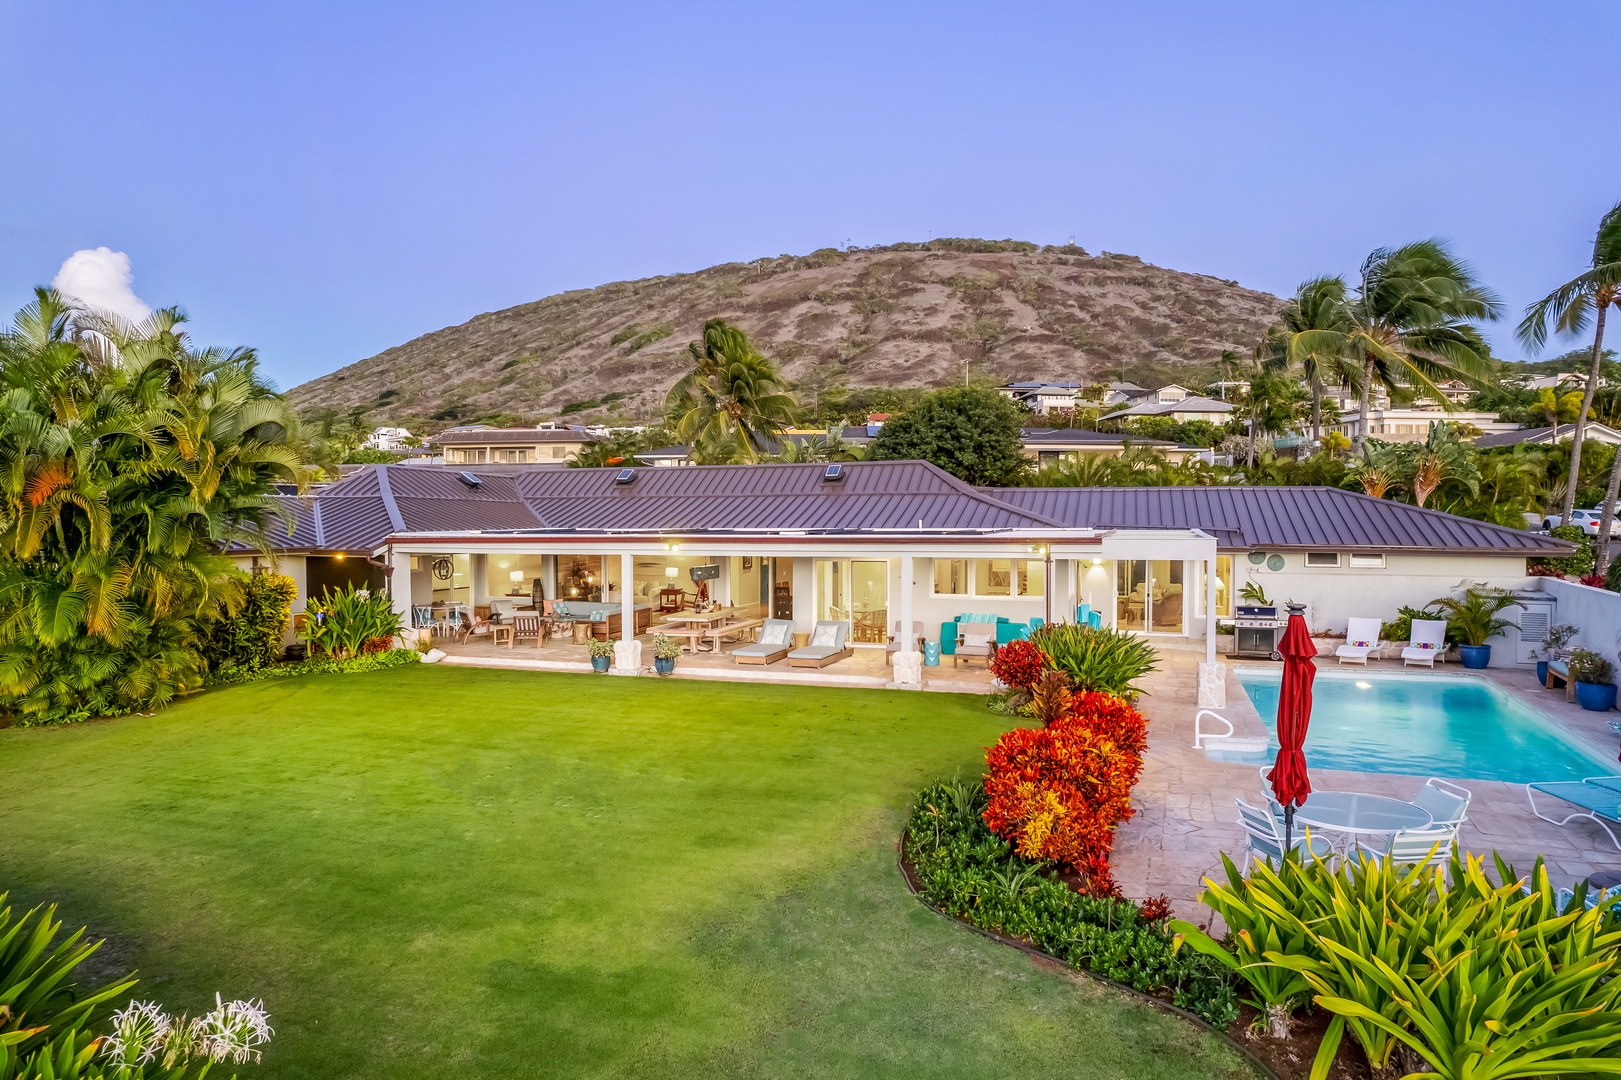 Honolulu Vacation Rentals, Hale Ola - The Villa from above